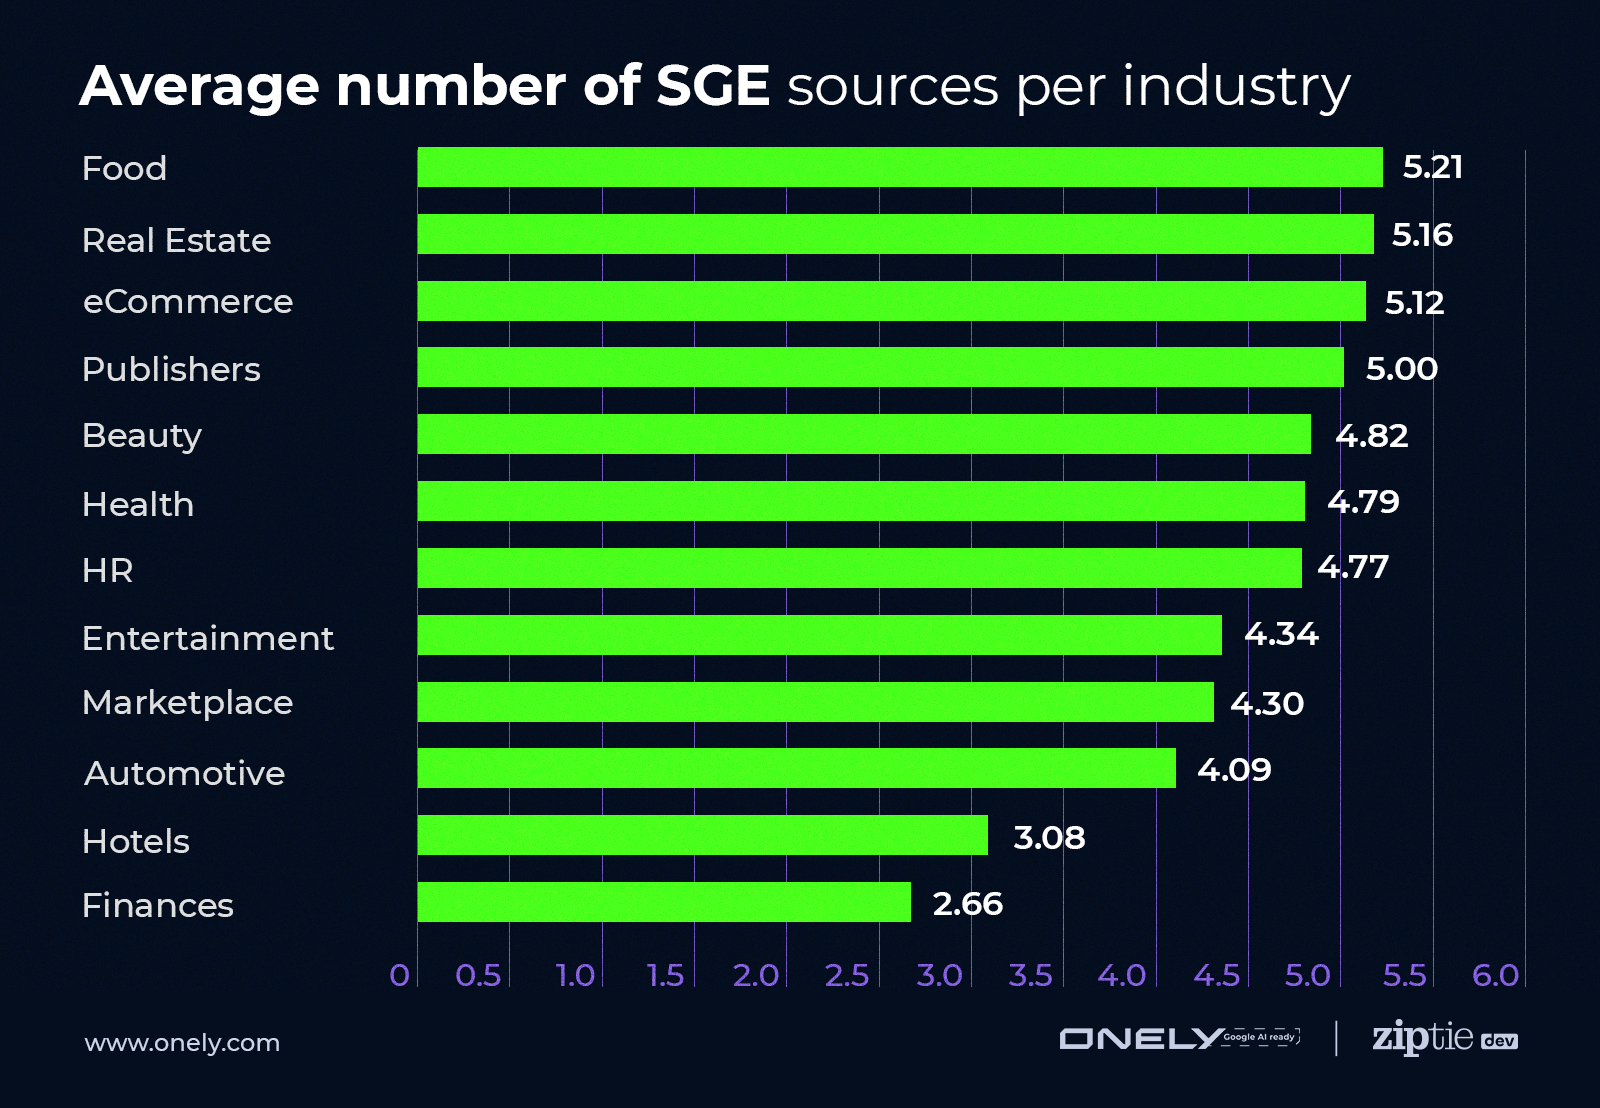 Average number of EMS sources by industry